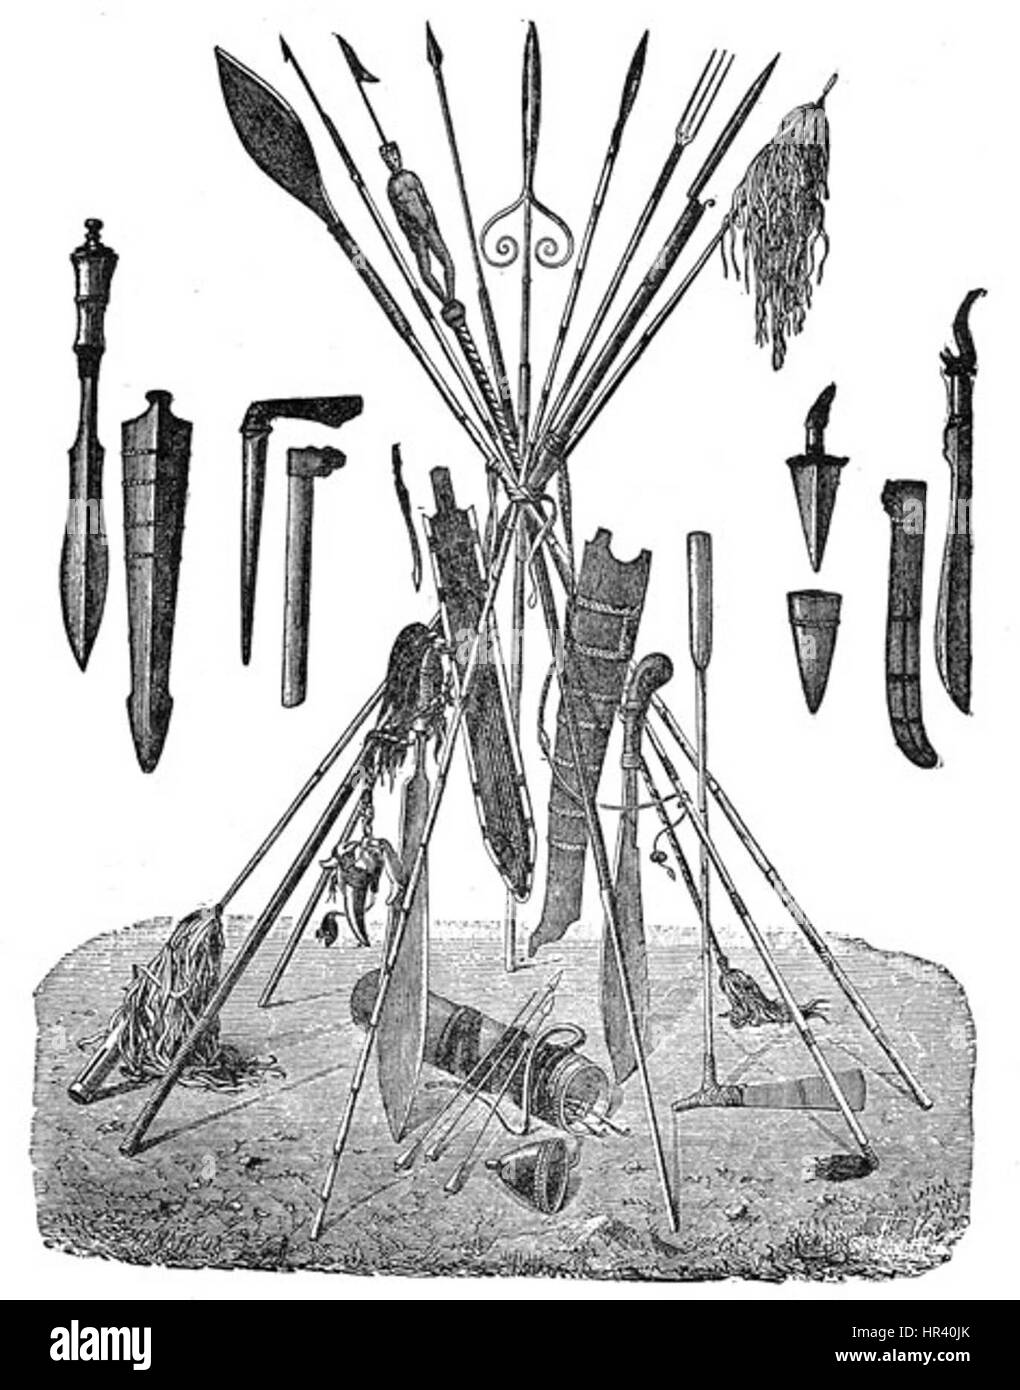 ancient native american weapons